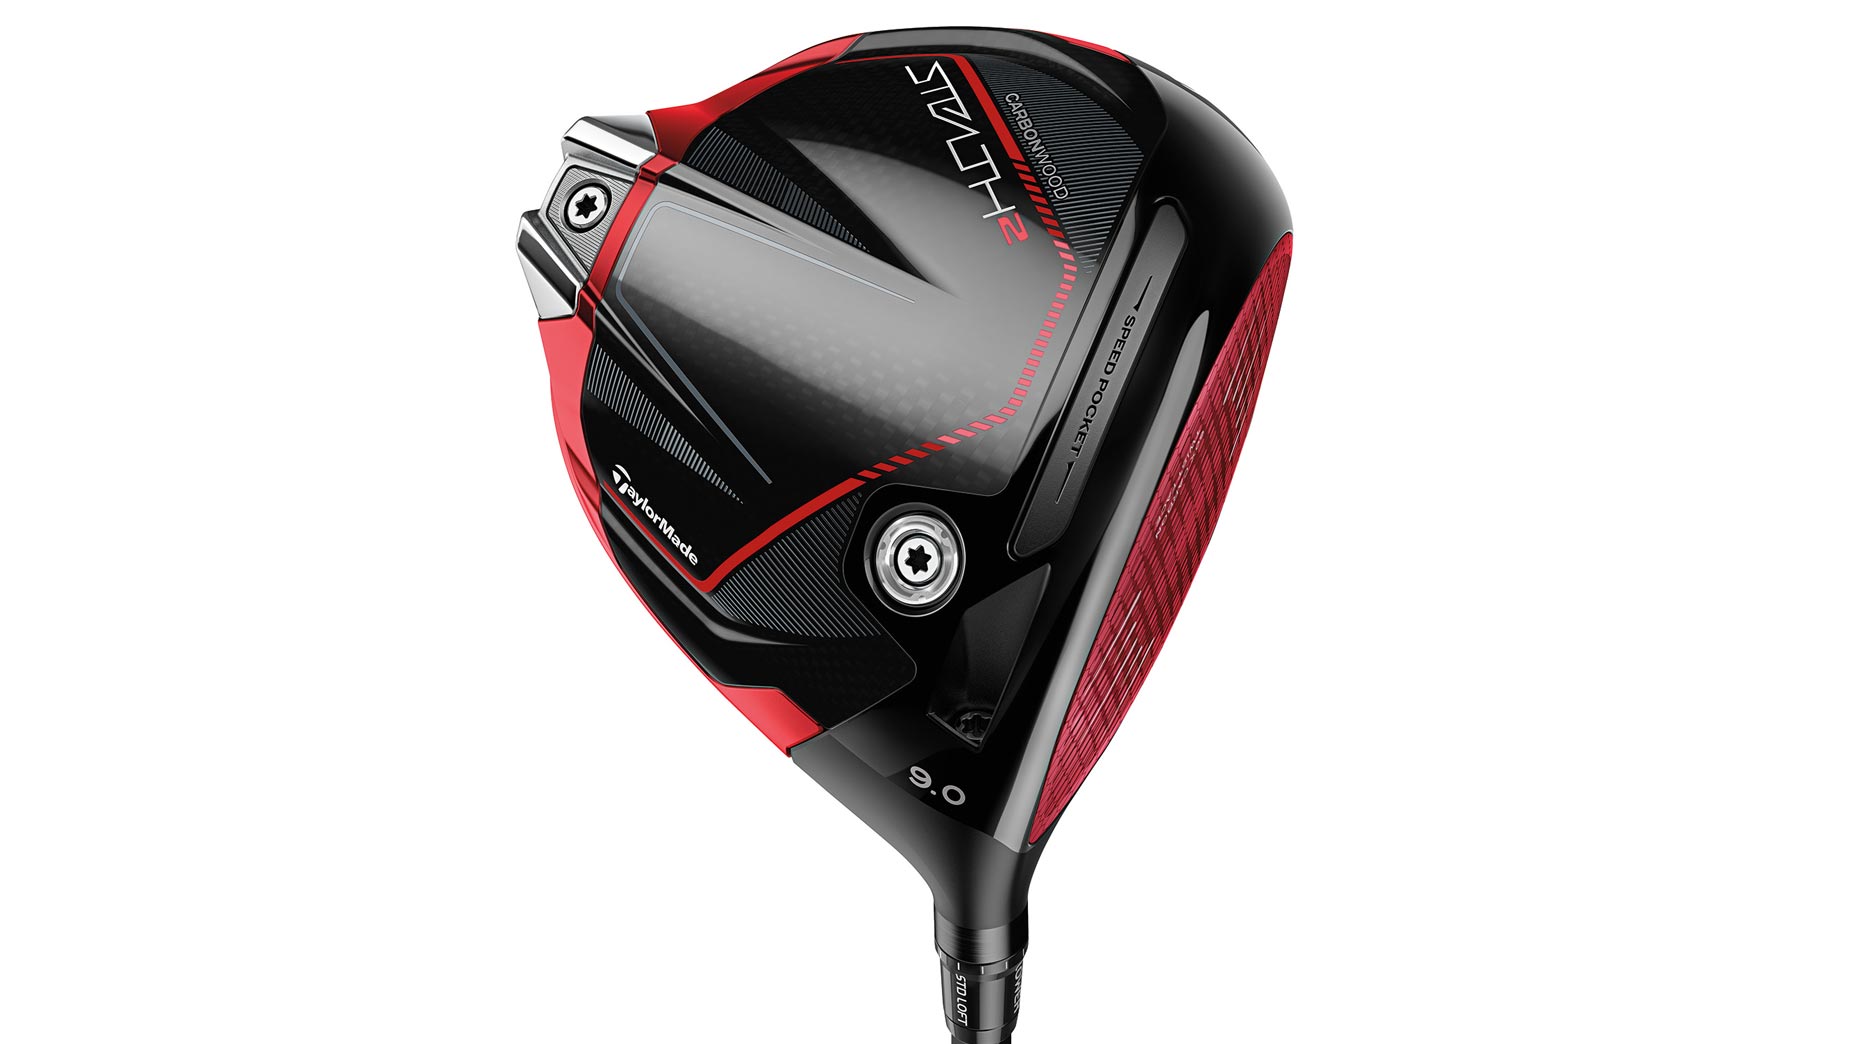 New TaylorMade golf clubs for 2023 (drivers, irons, wedges